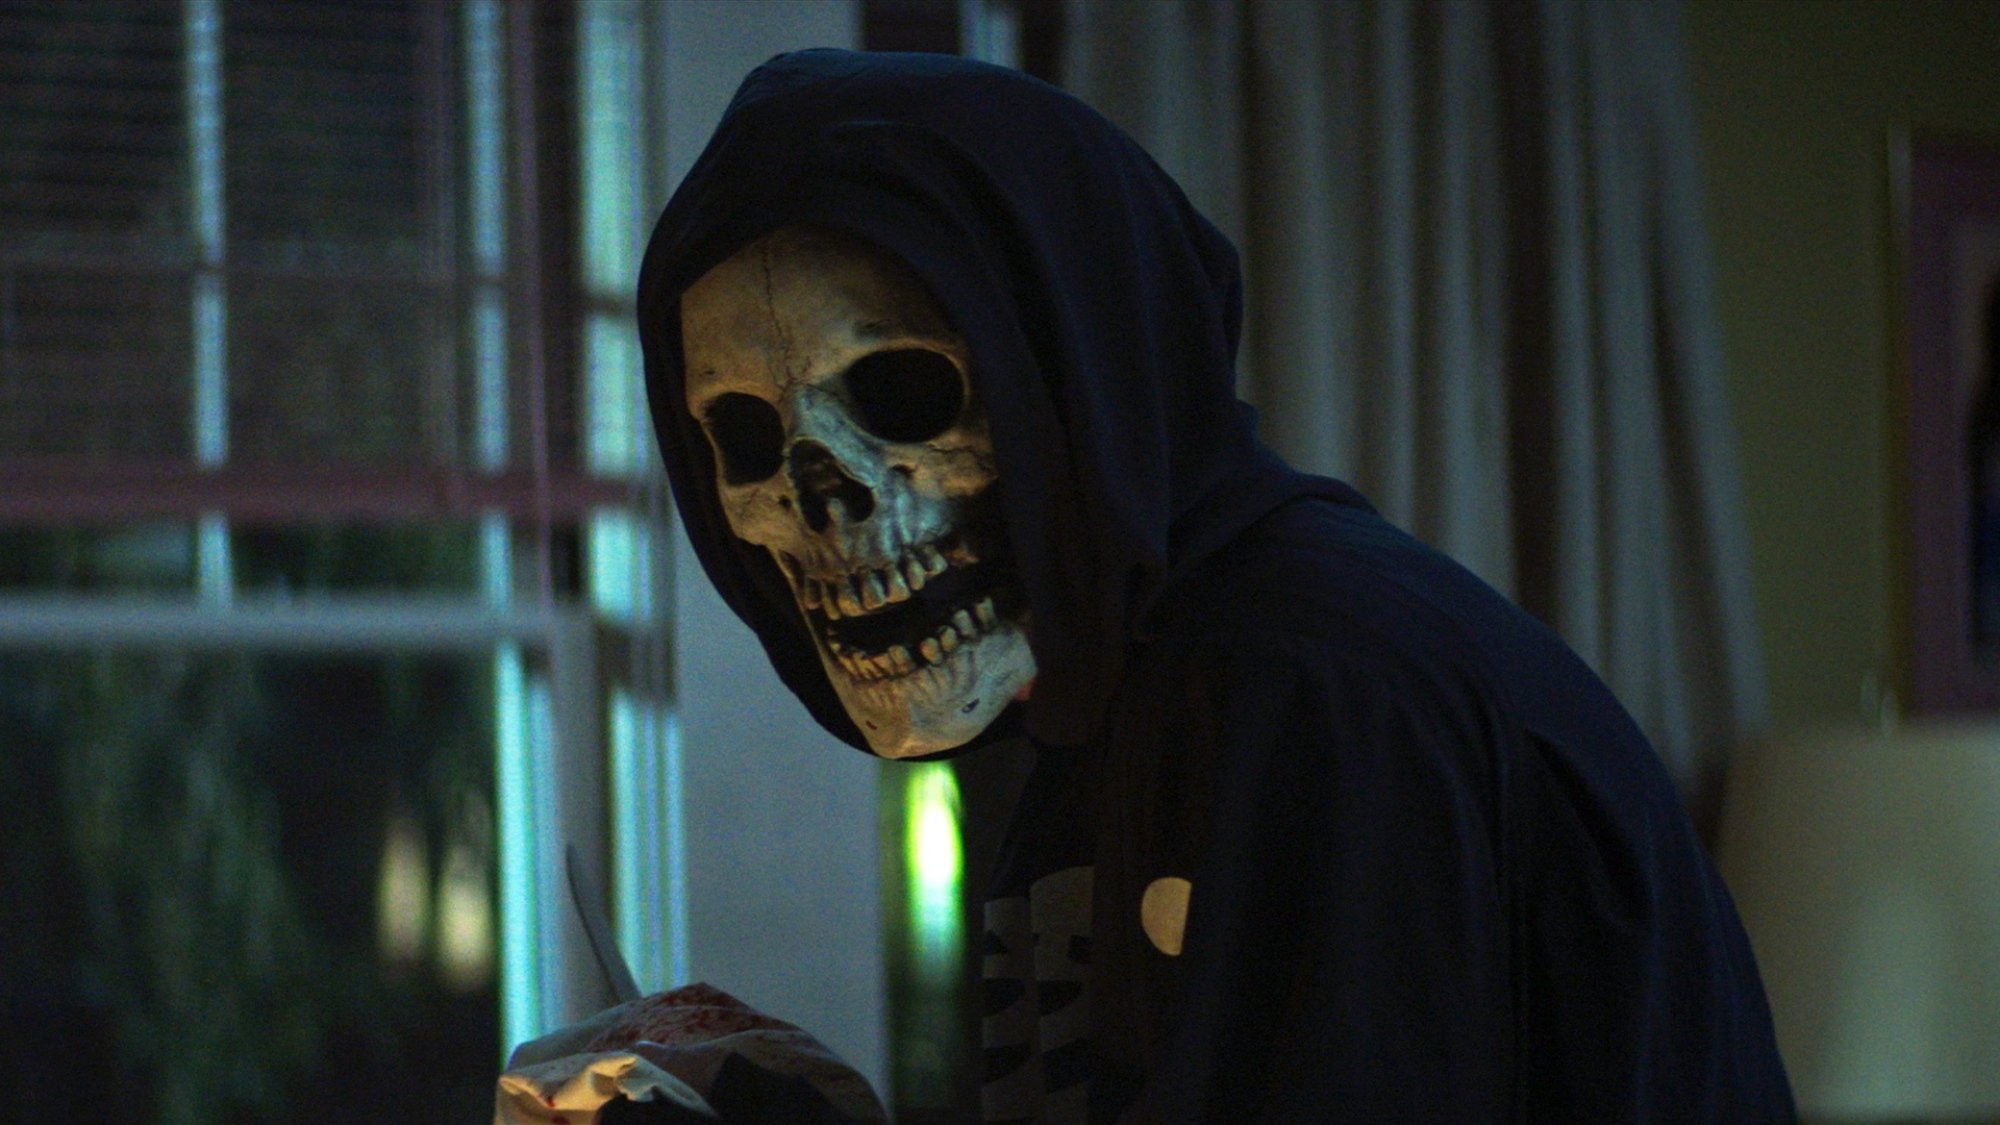 A person in a skeleton mask and black hood stares at the camera.